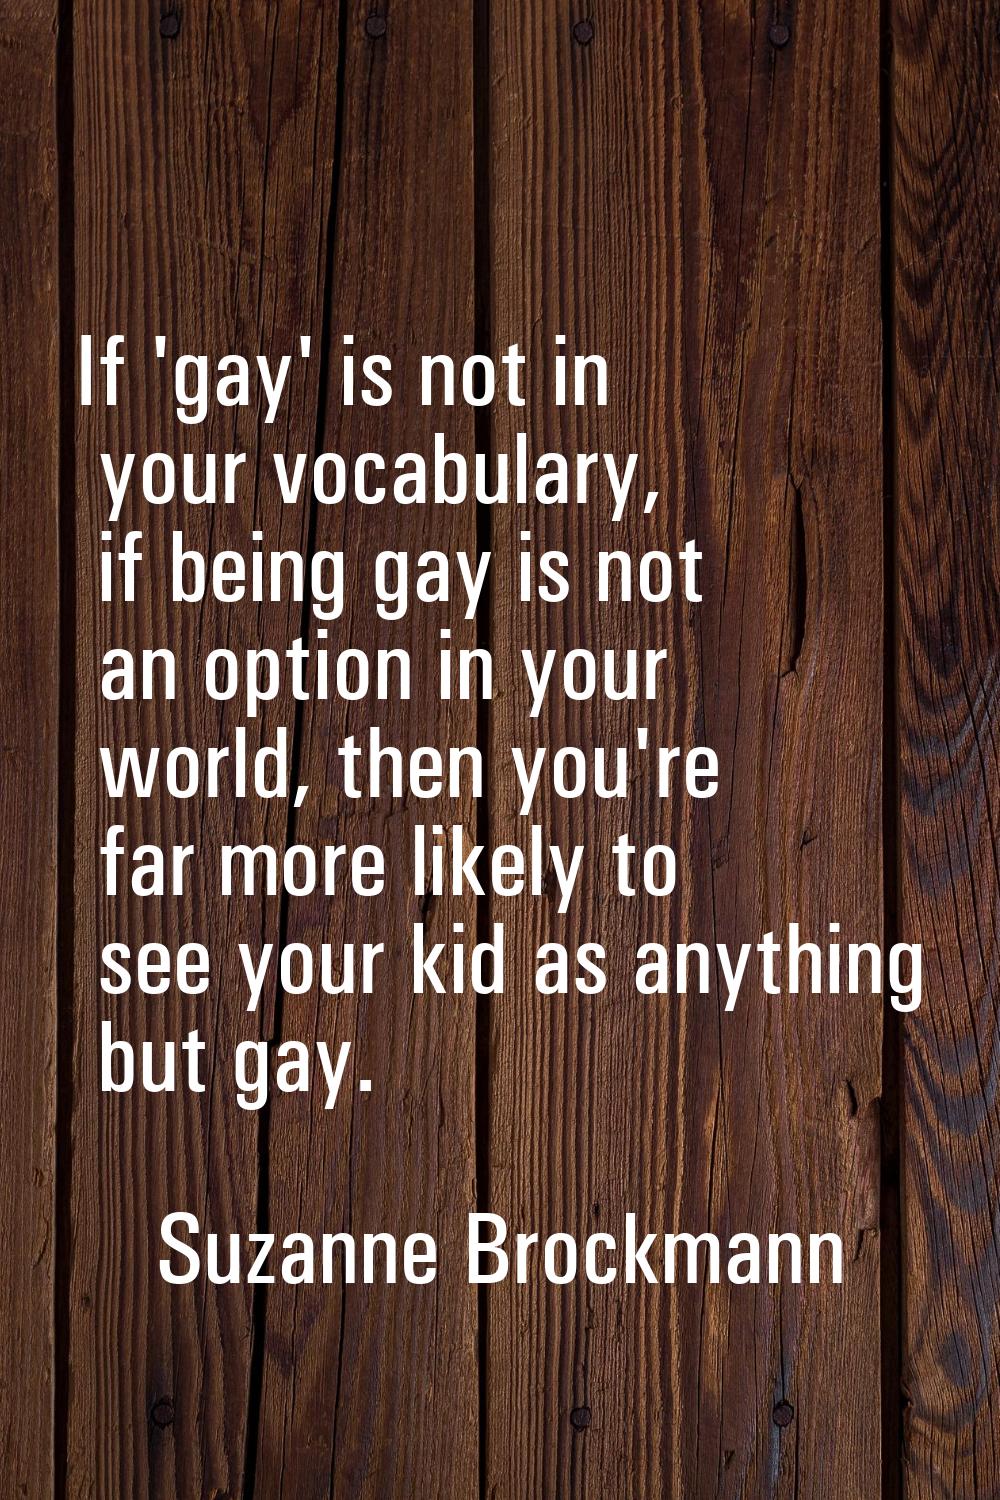 If 'gay' is not in your vocabulary, if being gay is not an option in your world, then you're far mo